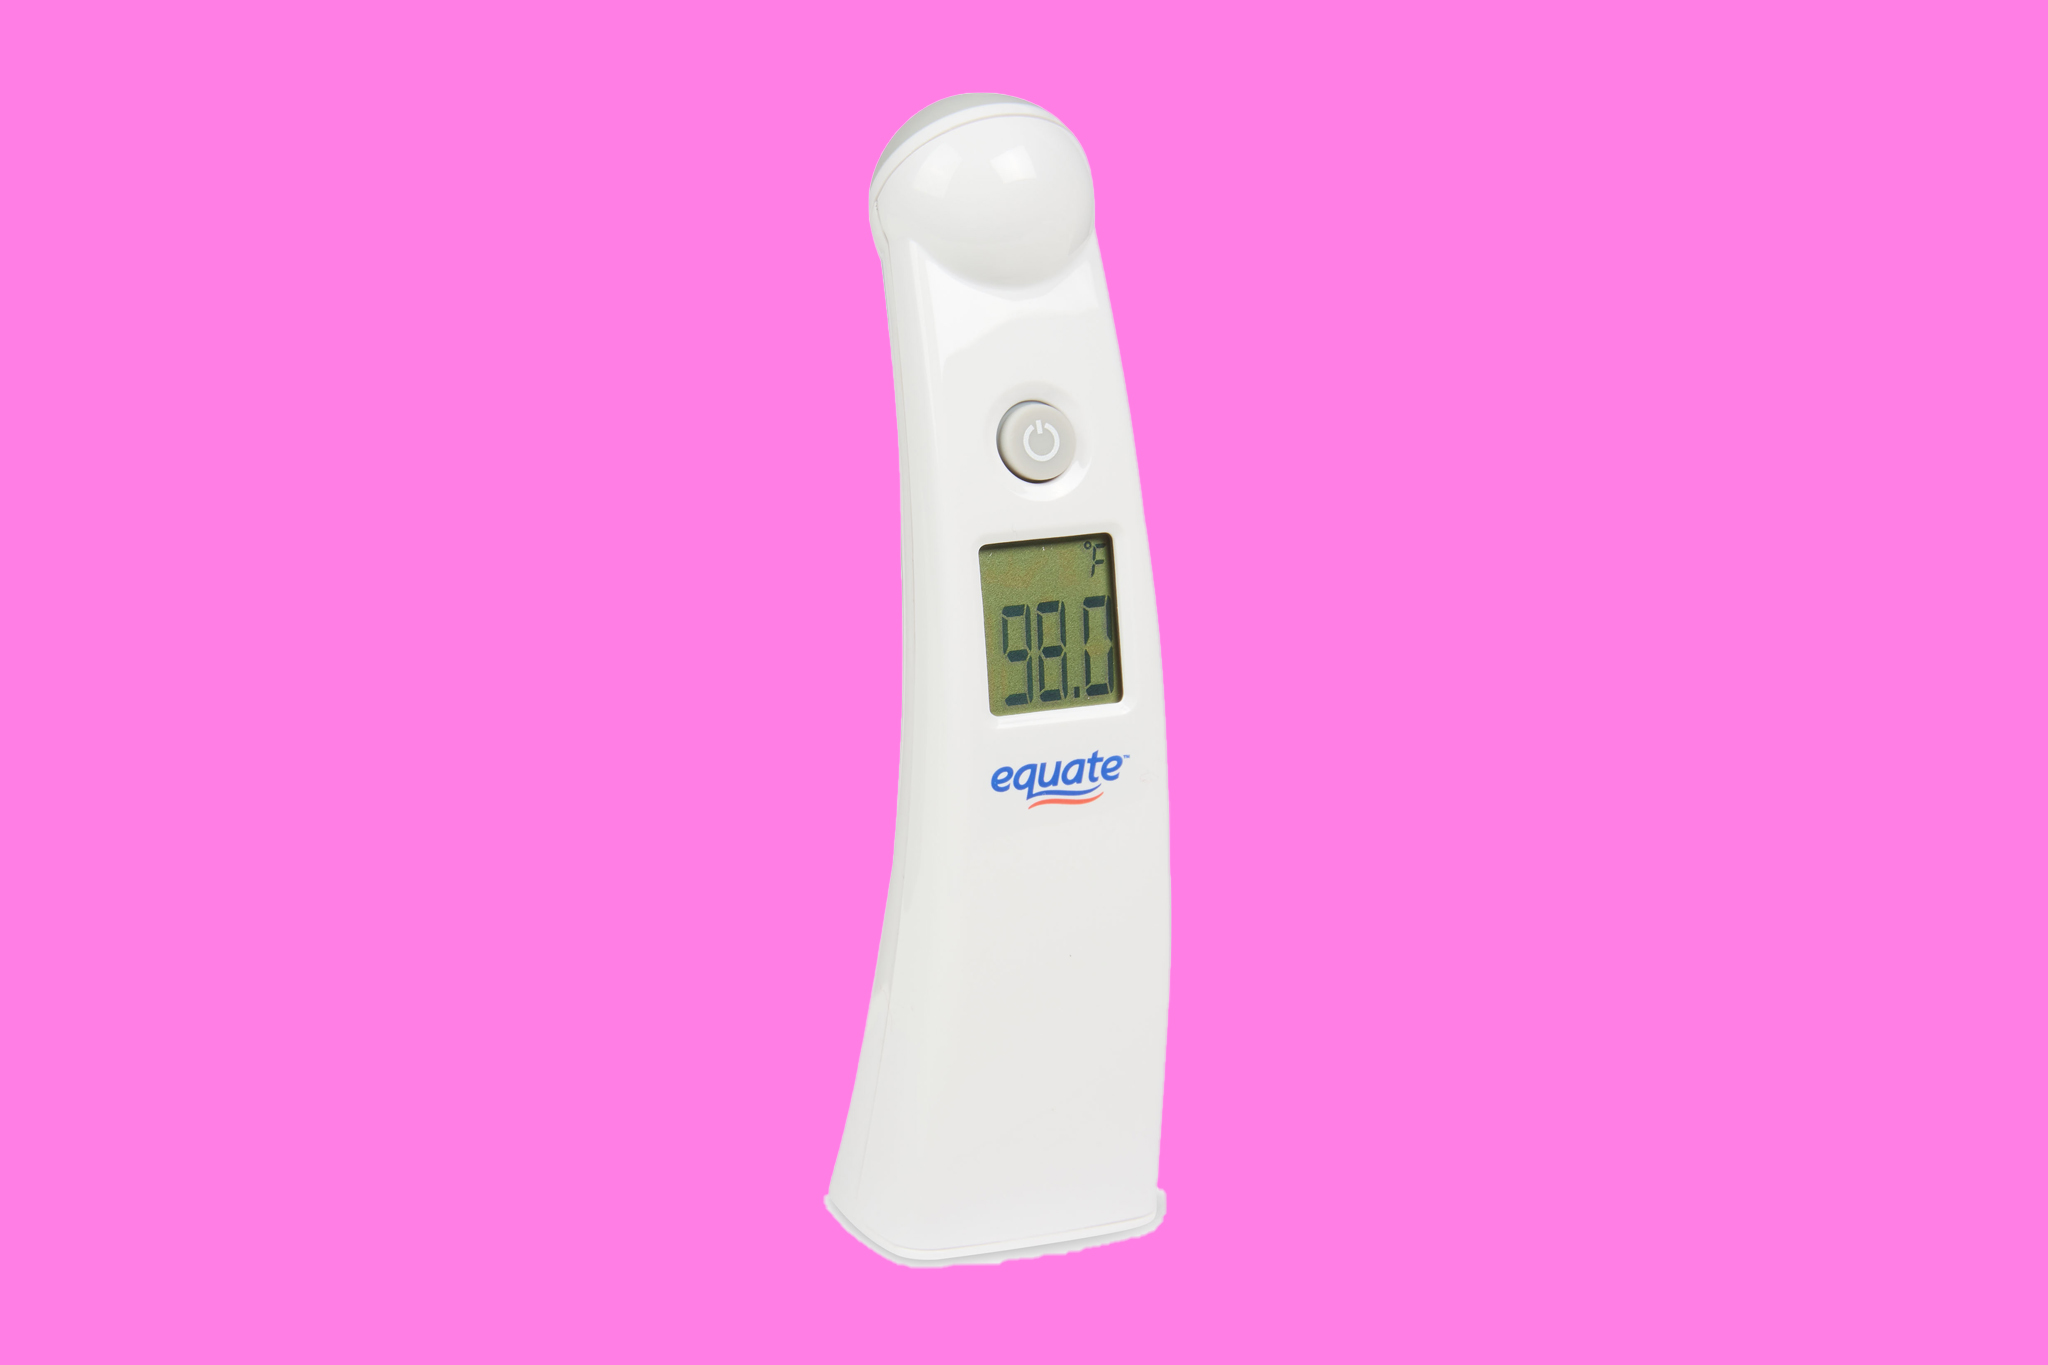 Equate Temple Touch 6-Second Digital Thermometer